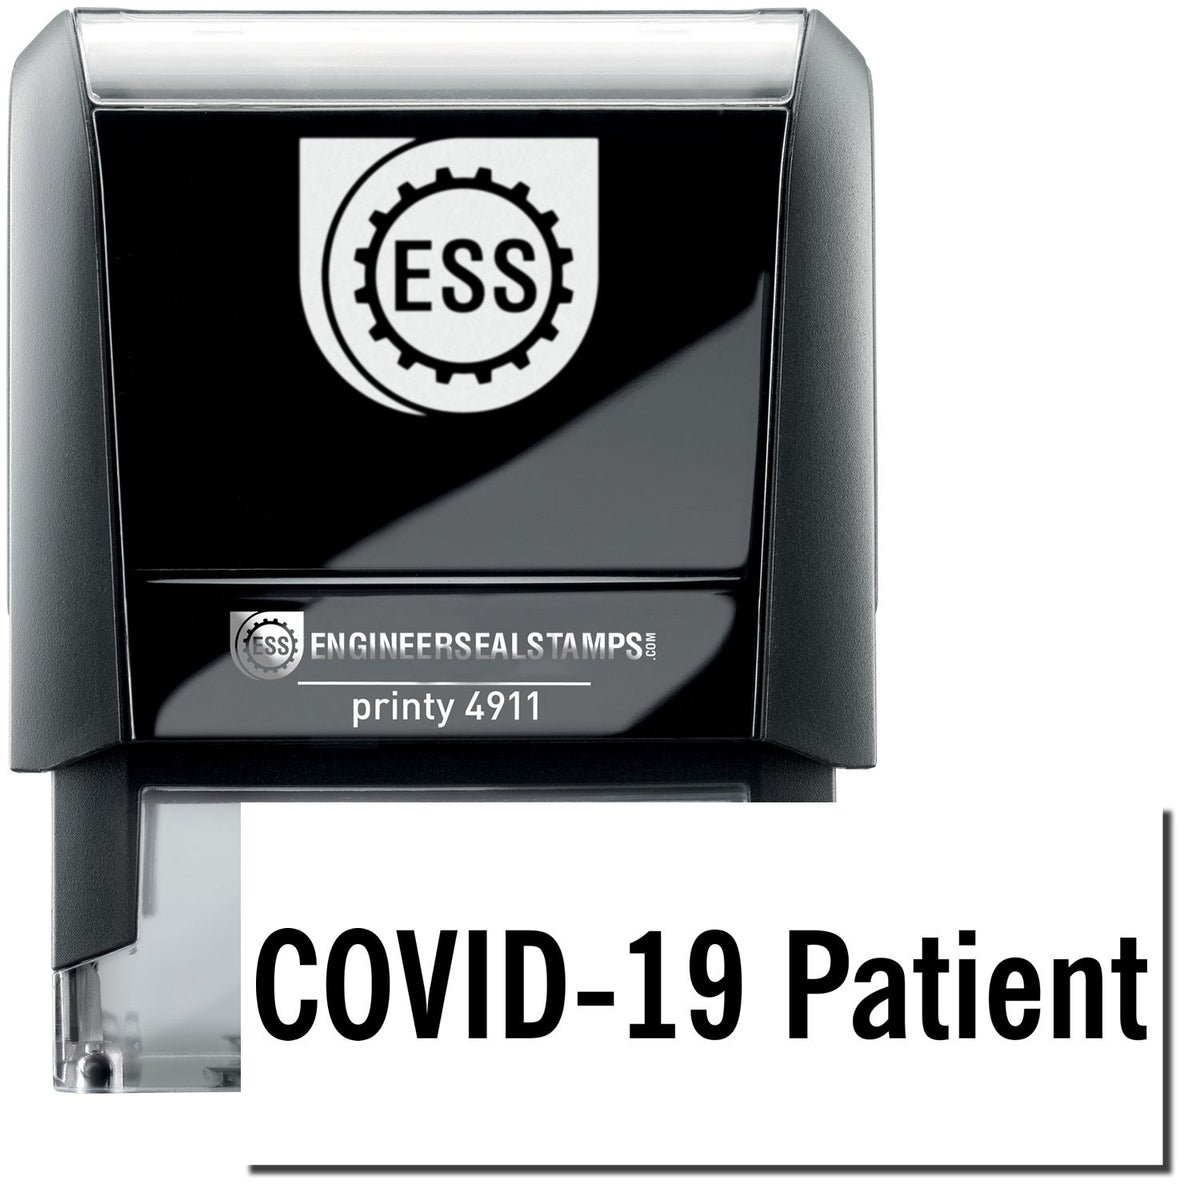 A self-inking stamp with a stamped image showing how the text &quot;COVID-19 Patient&quot; is displayed after stamping.